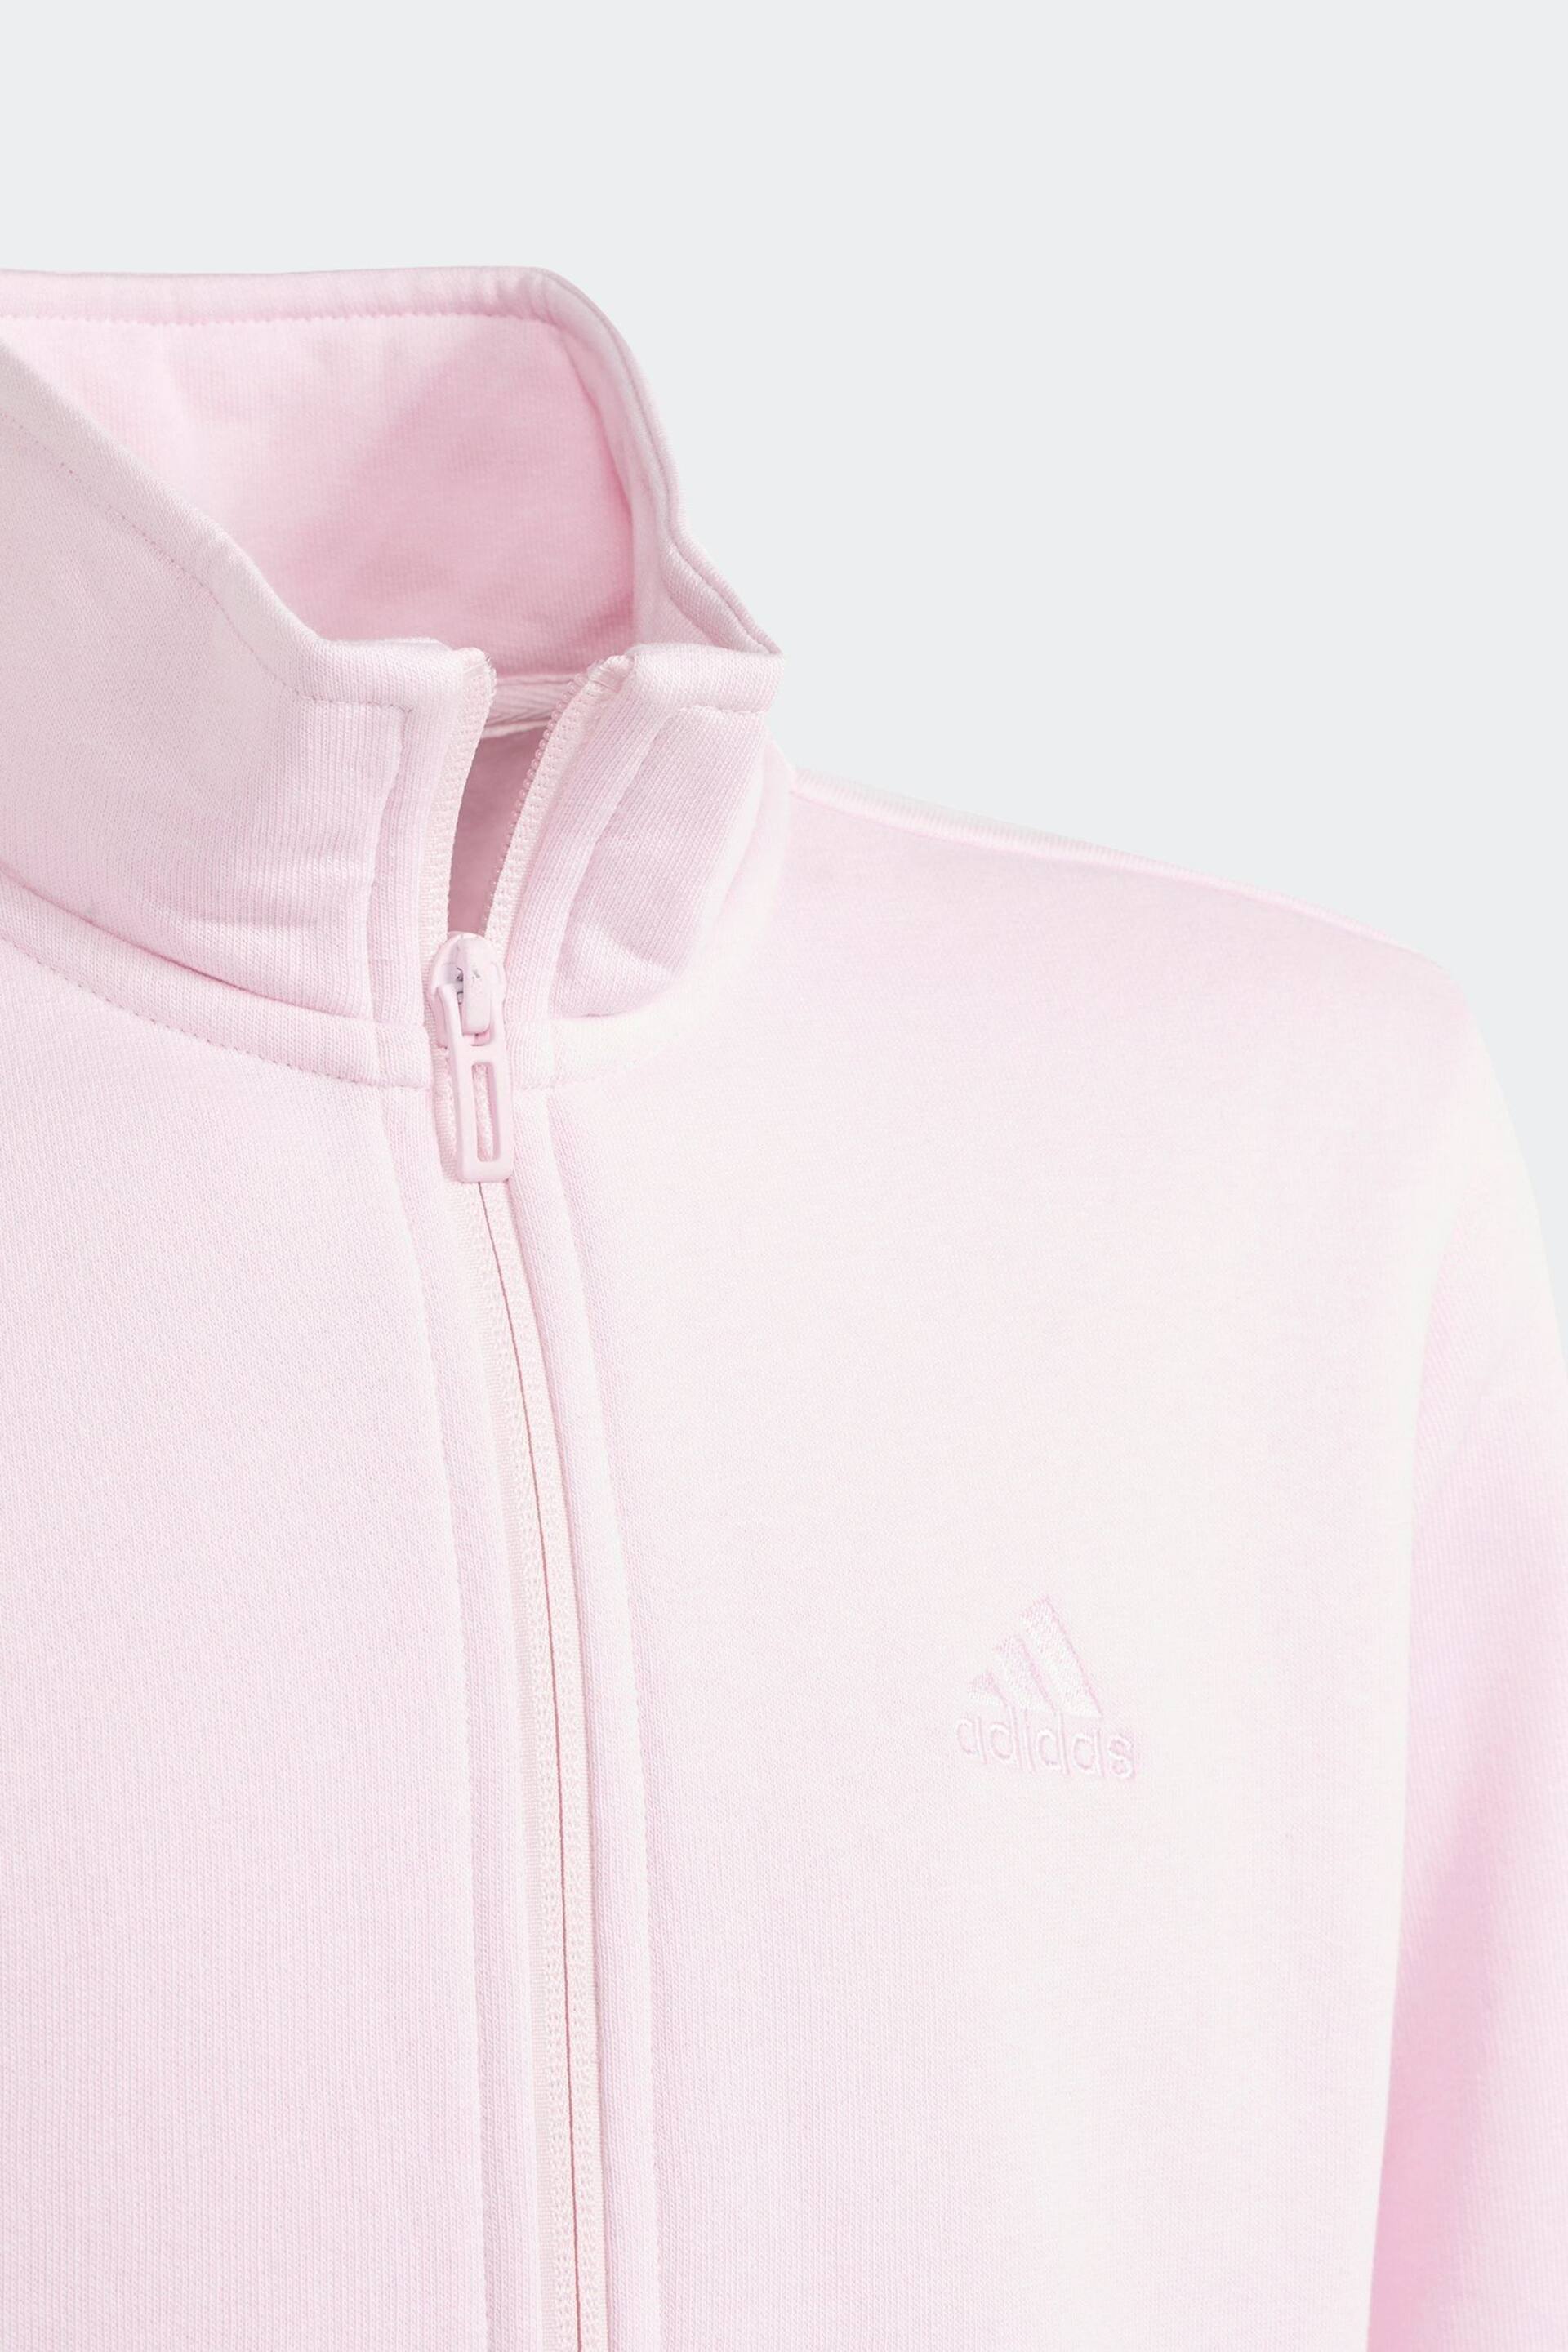 adidas Pink Kids Sportswear All Szn Graphic Tracksuit - Image 5 of 6